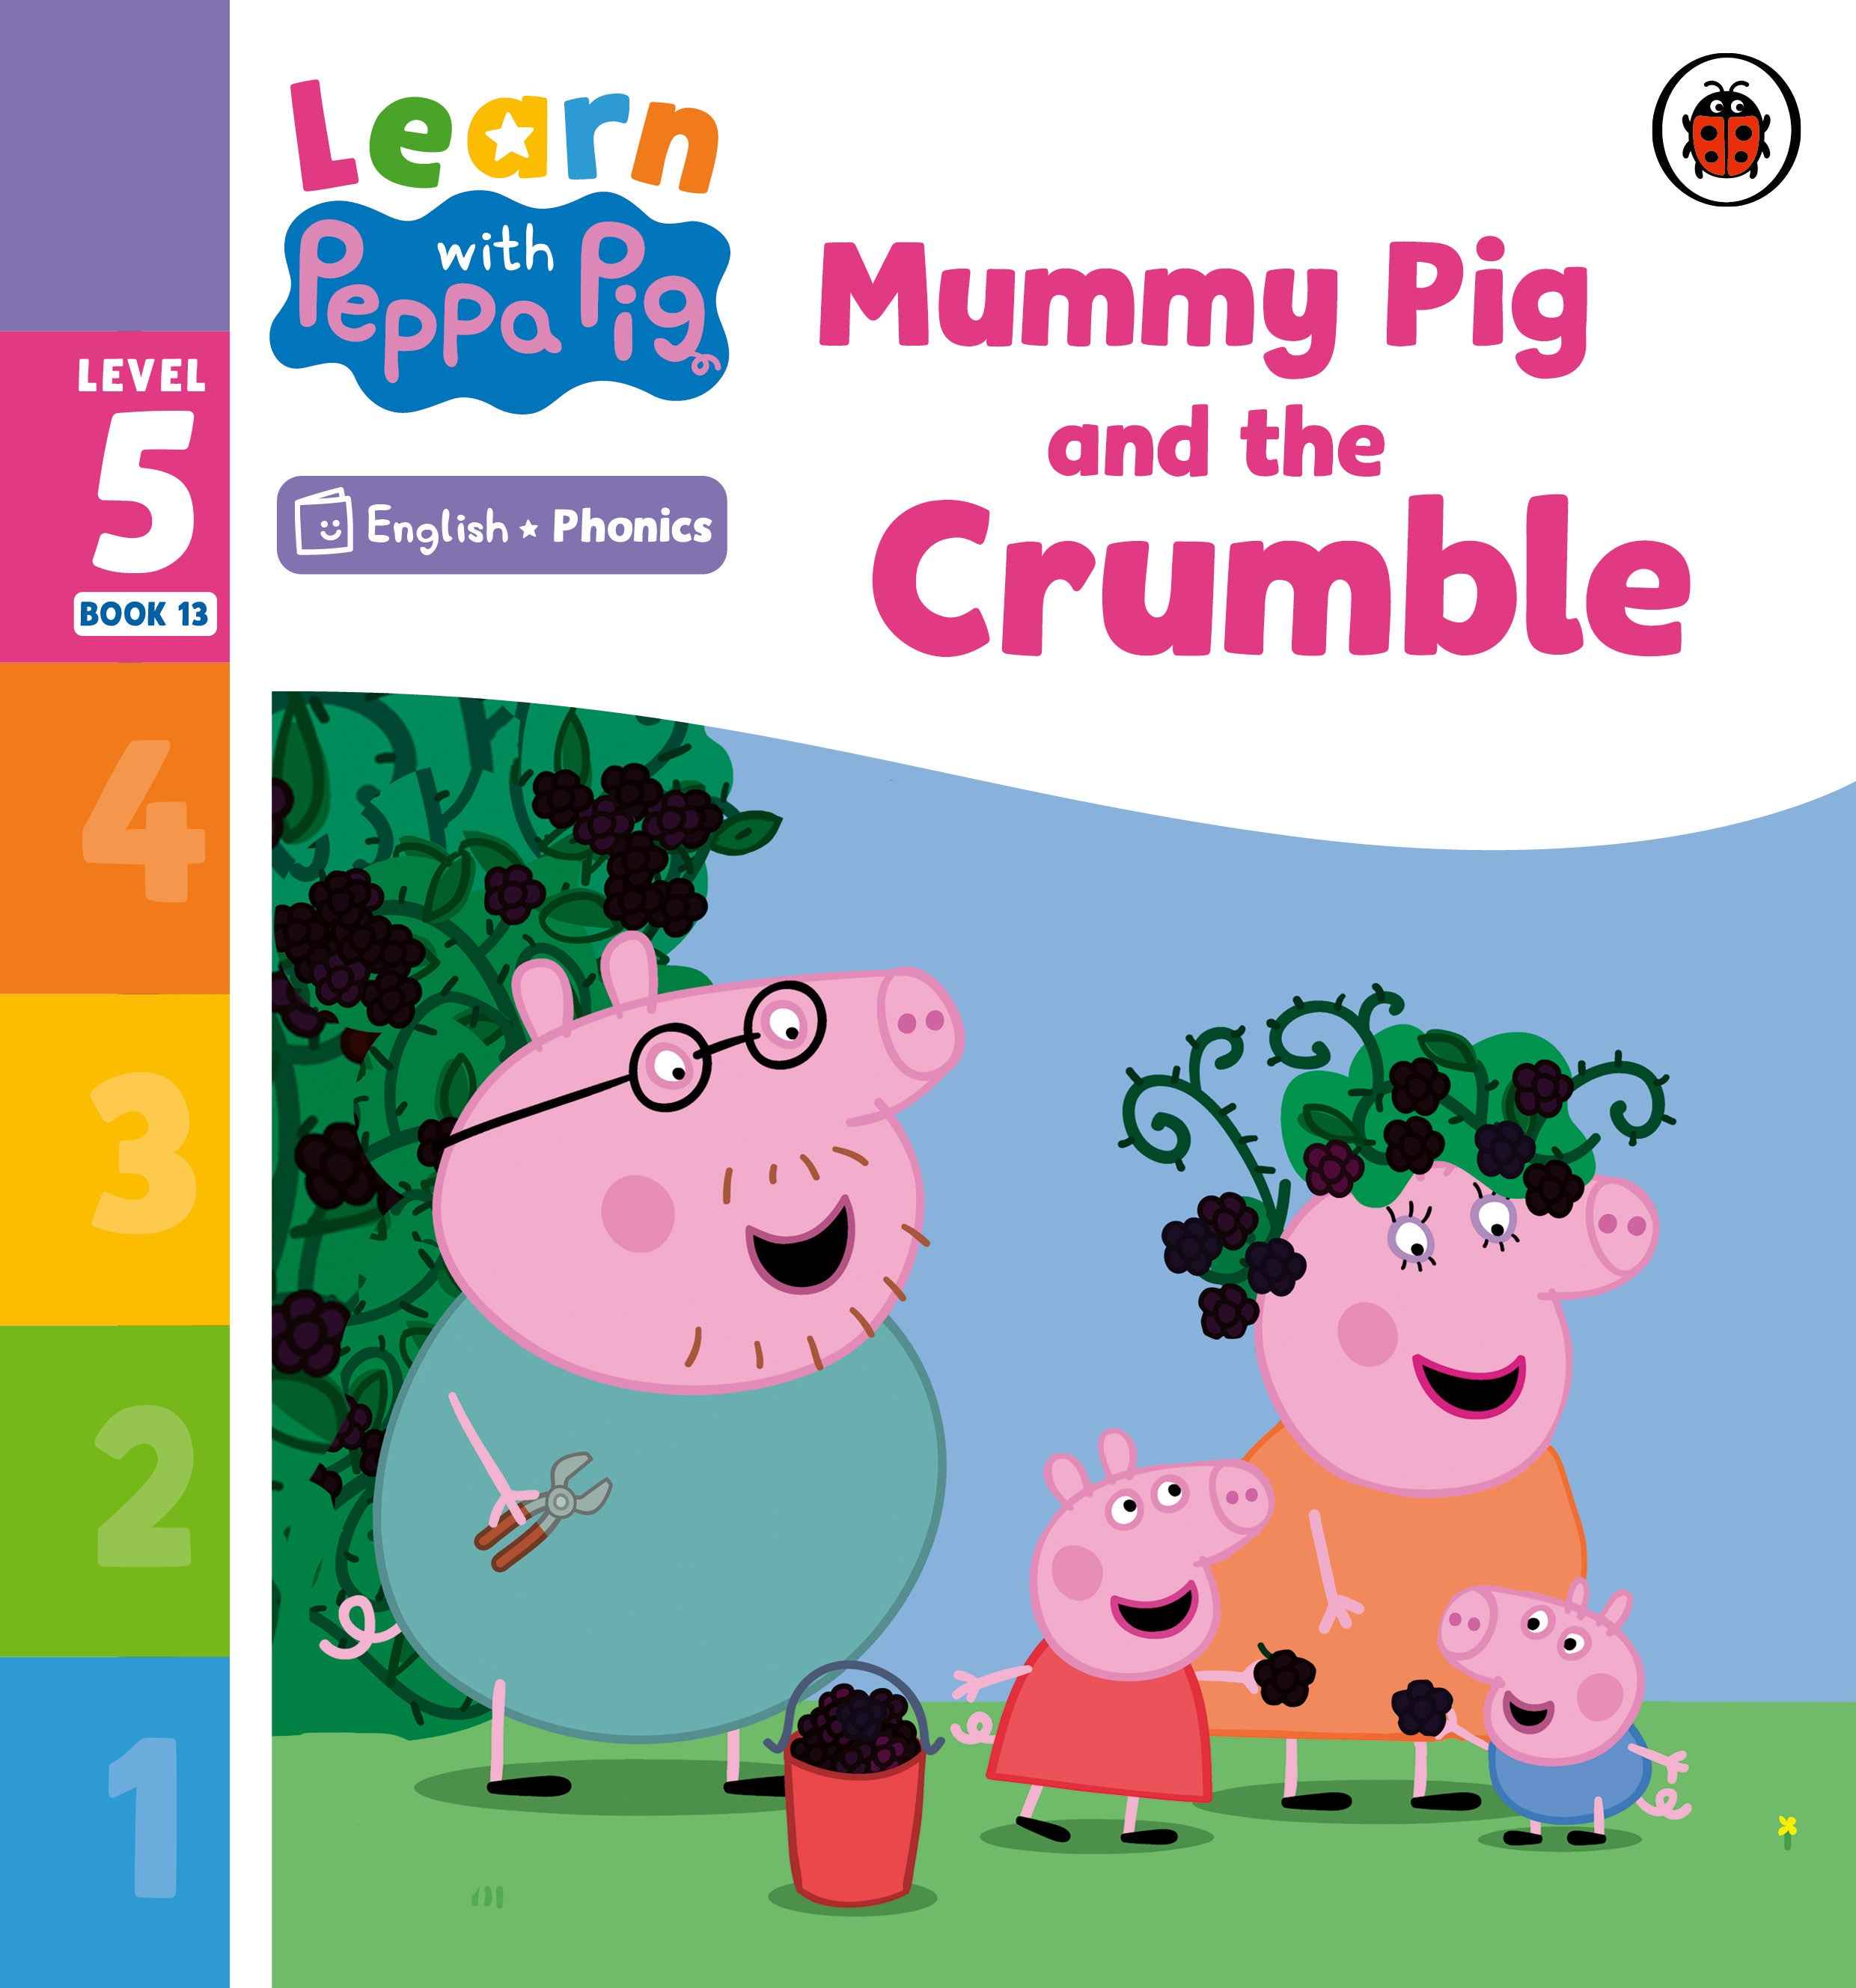 Mummy Pig and the Crumble